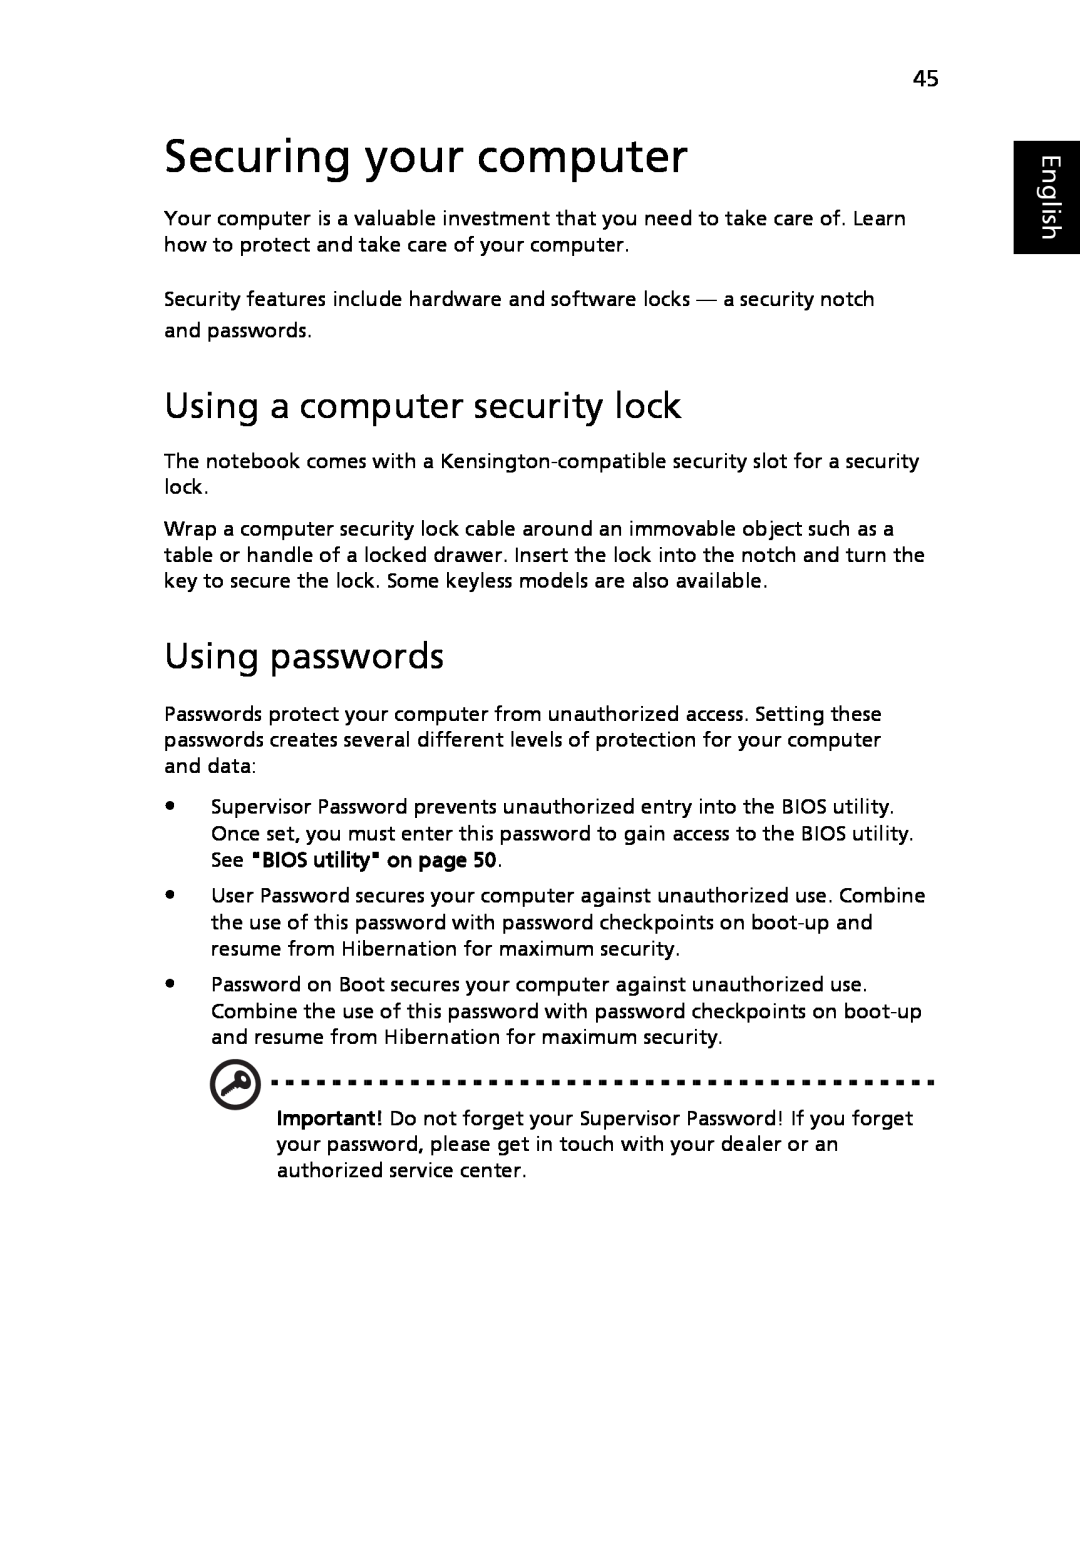 Acer 3630 manual Securing your computer, Using a computer security lock, Using passwords, English 